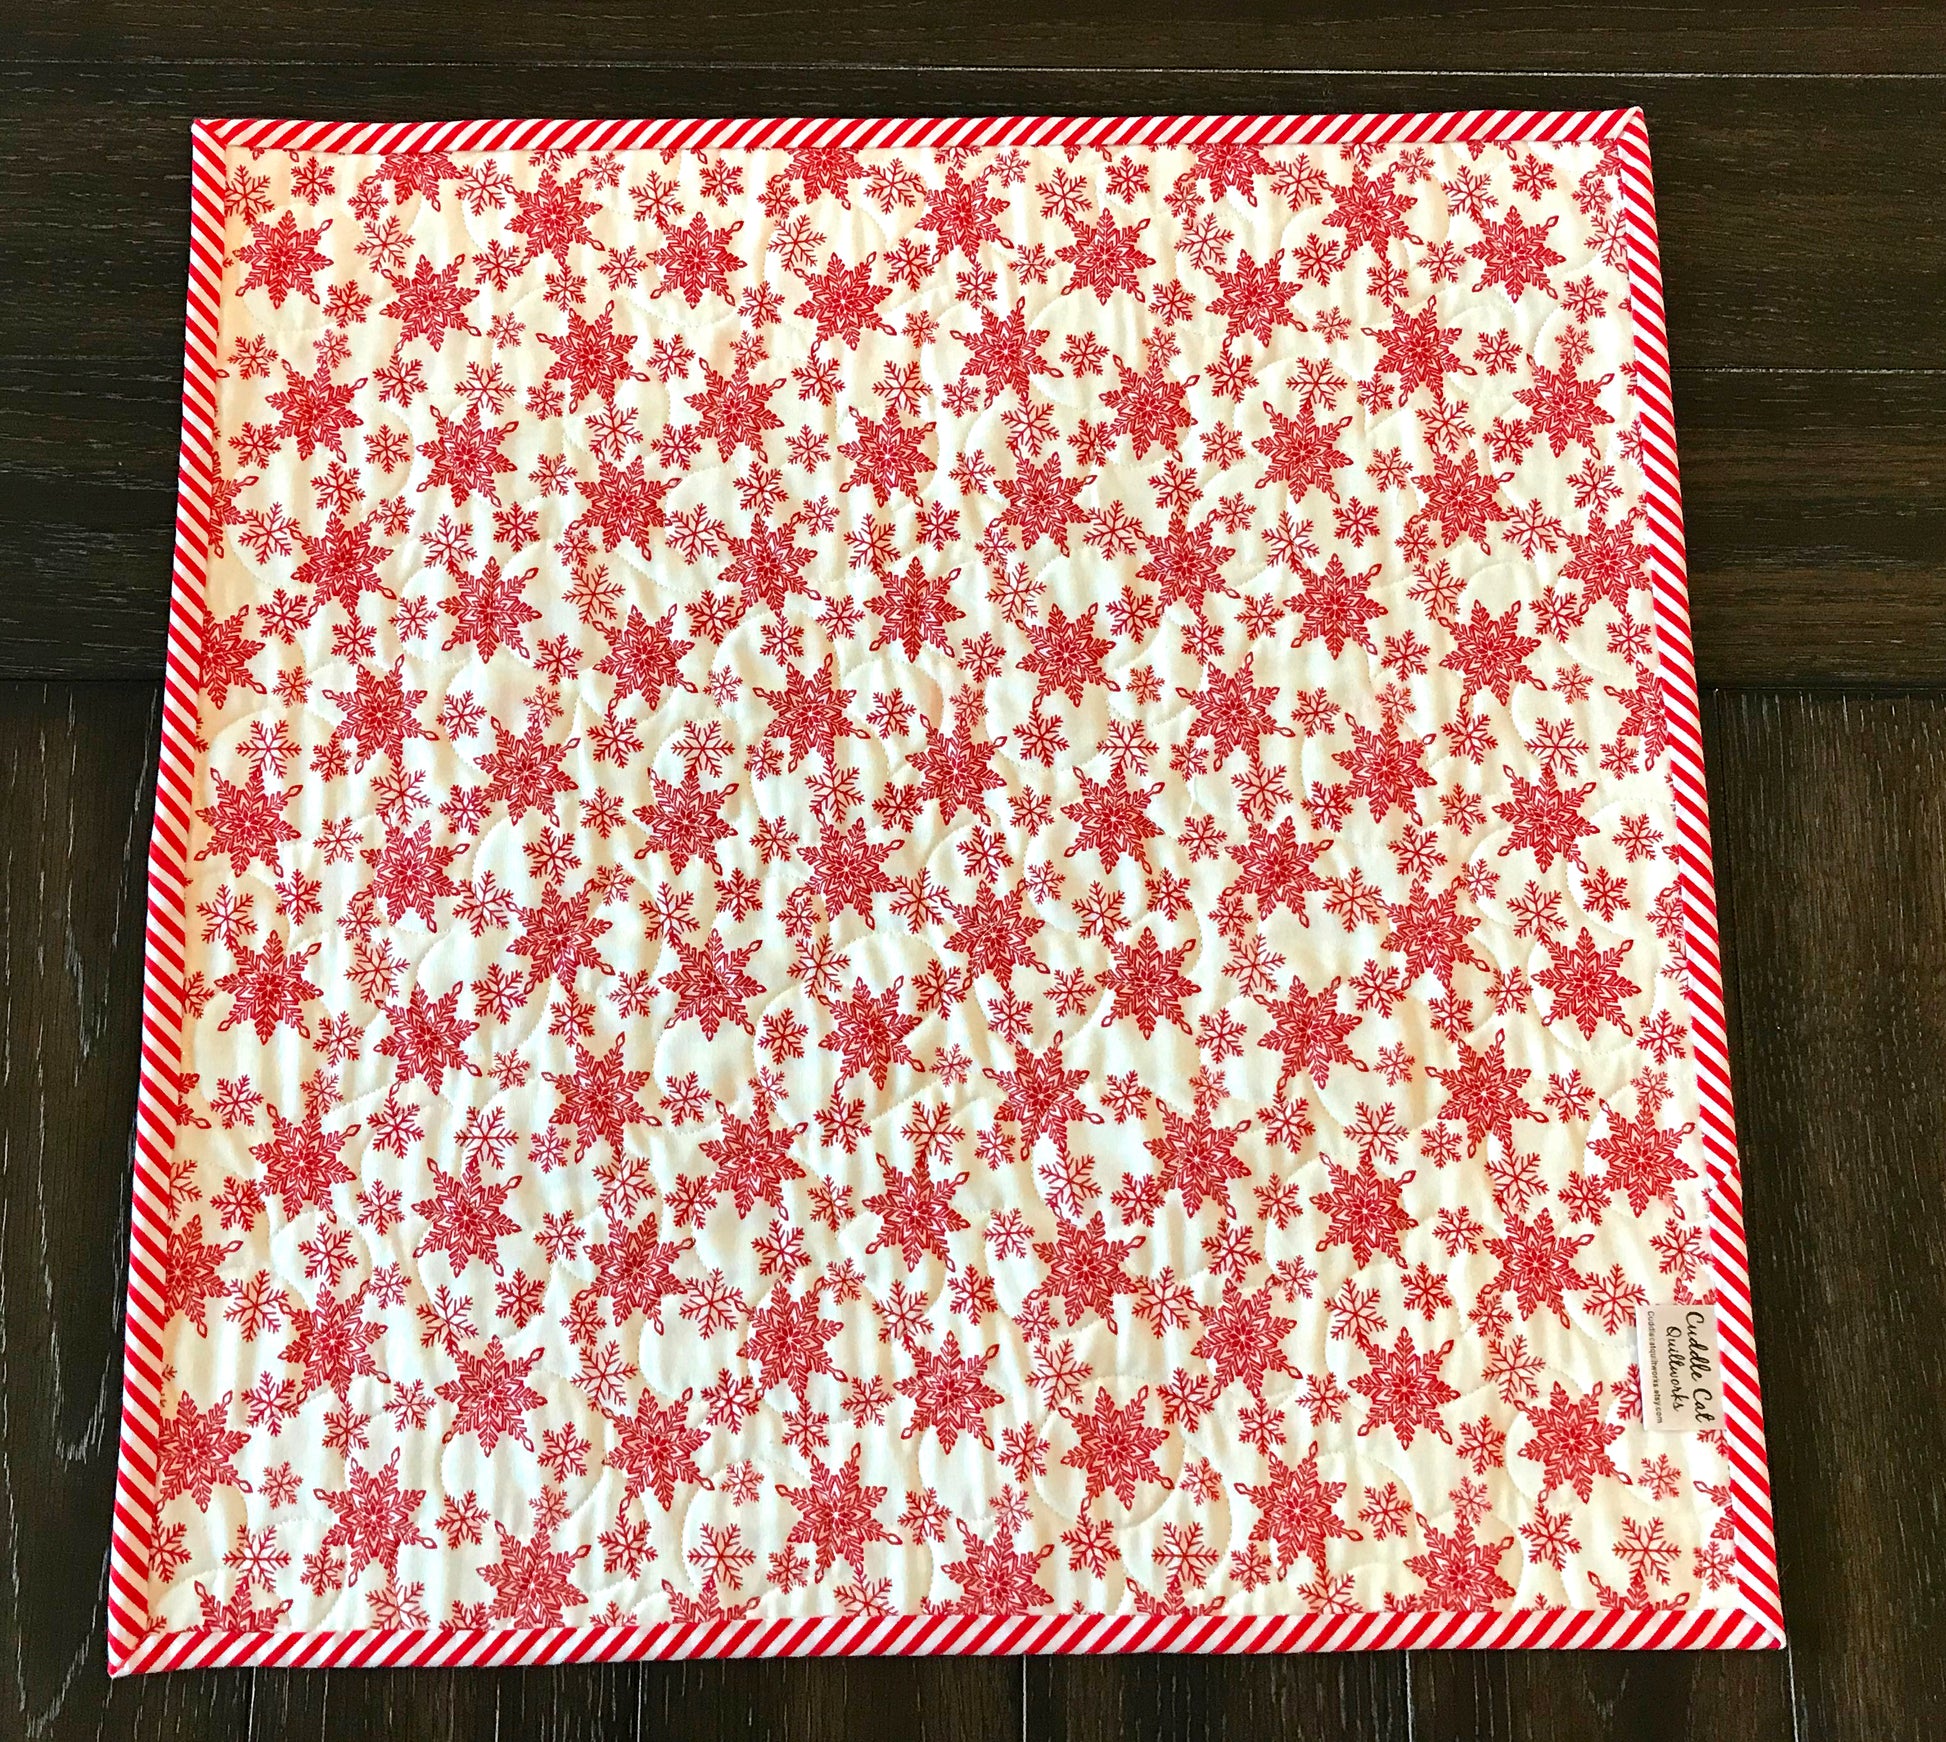 Red and Green Candy Cane Christmas Table Topper with Peppermint Striped Border 20.5" X 20.5" - Handmade Quilts, Digital Patterns, and Home Décor items online - Cuddle Cat Quiltworks